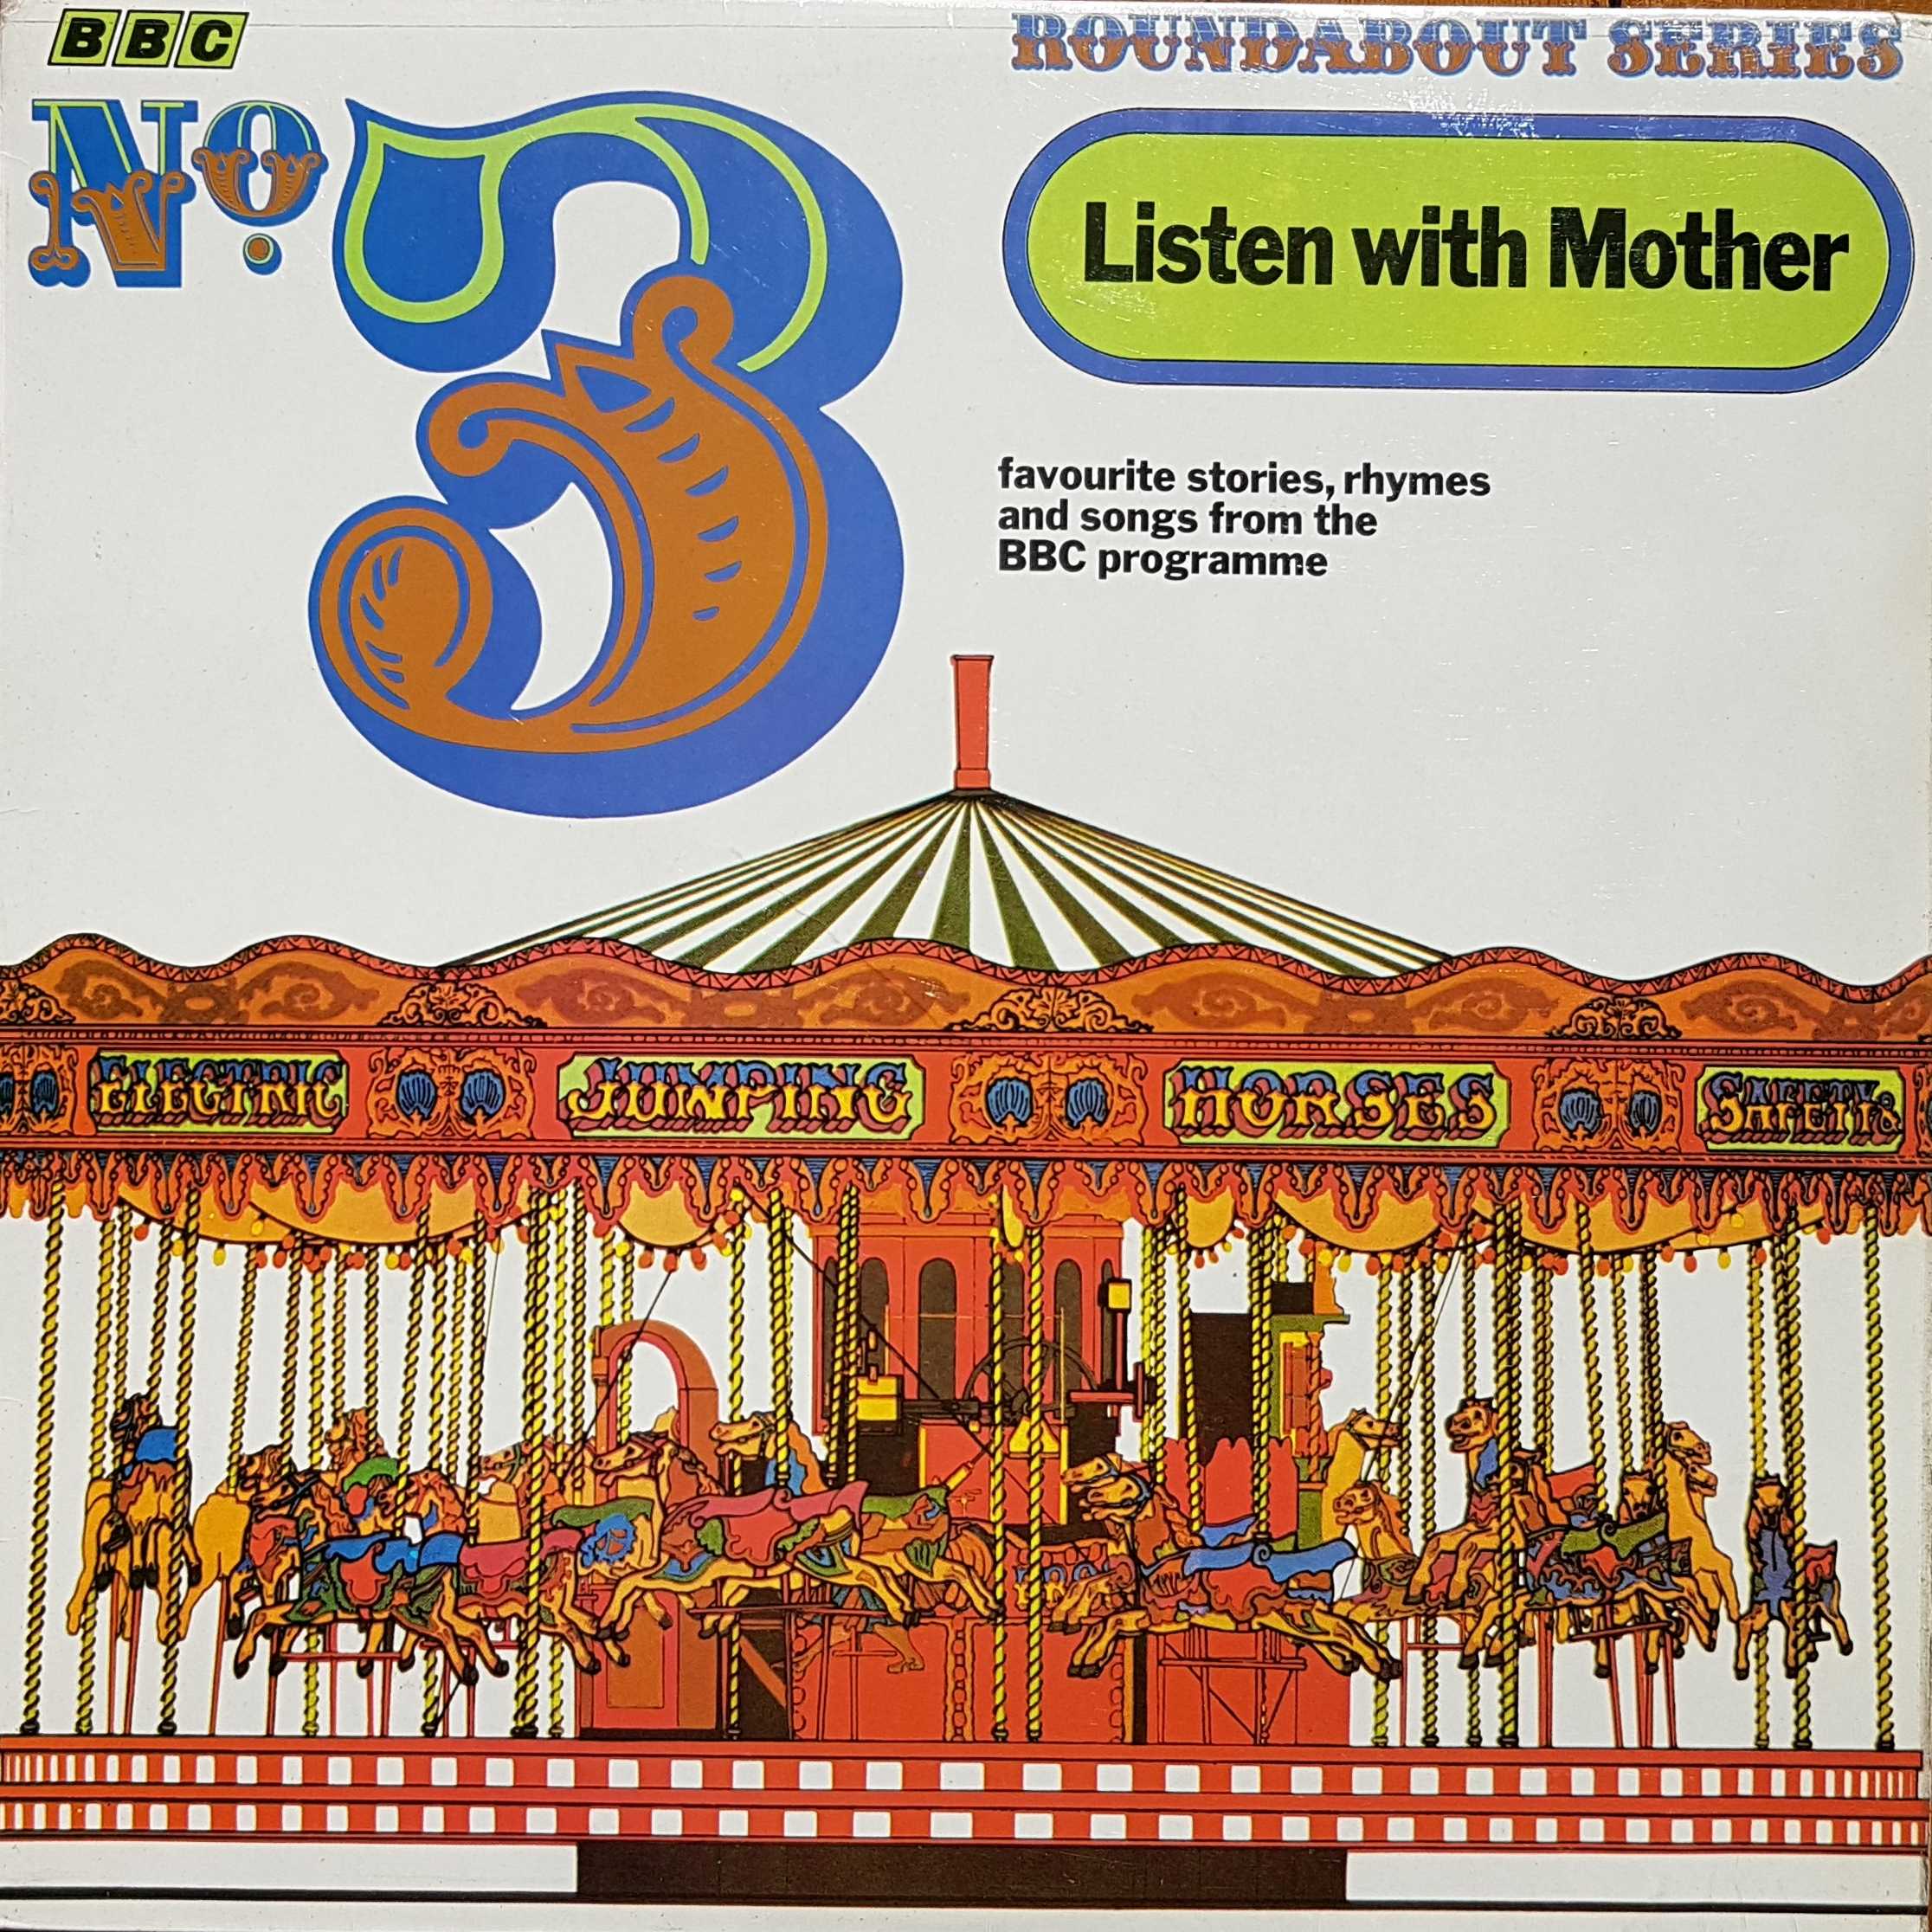 Picture of Listen with mother by artist Various from the BBC albums - Records and Tapes library